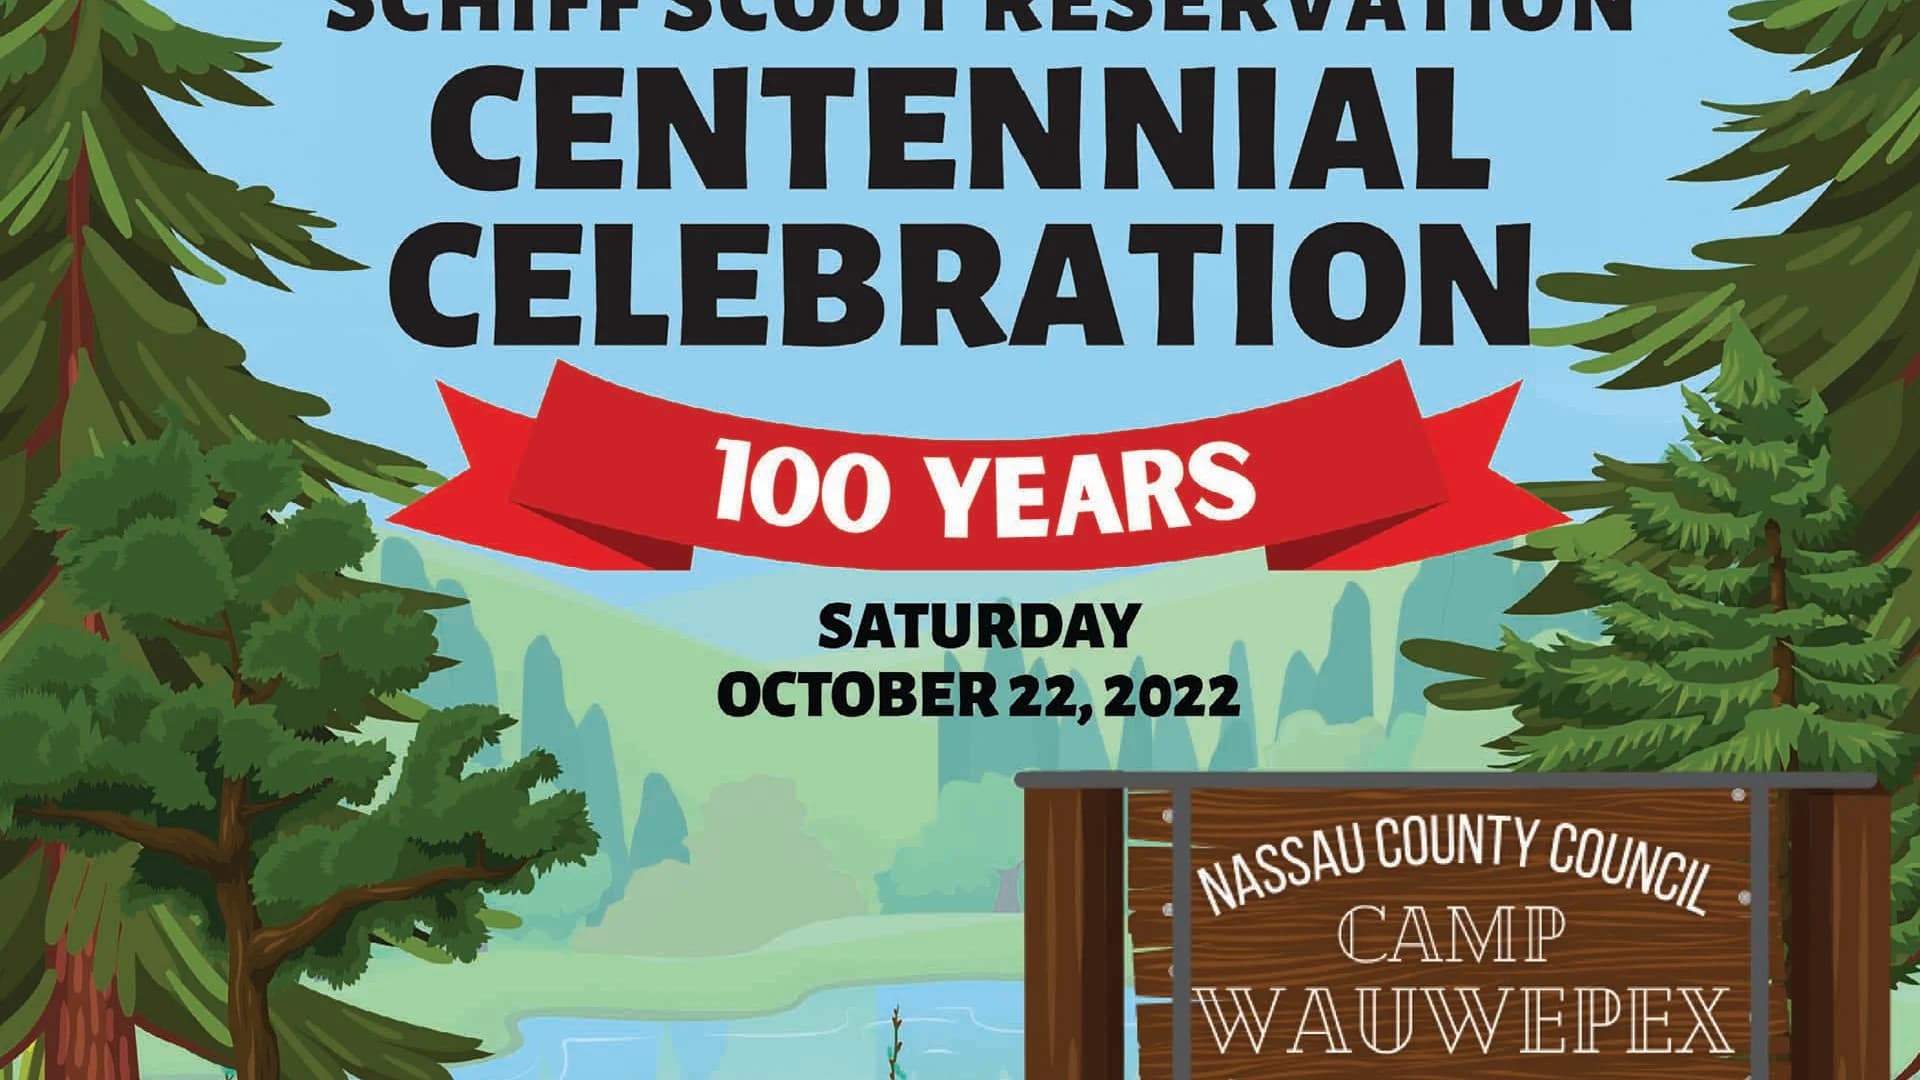 Boy Scouts of America hold centennial celebration of Camp Wauwepex/Schiff Scout Reservation